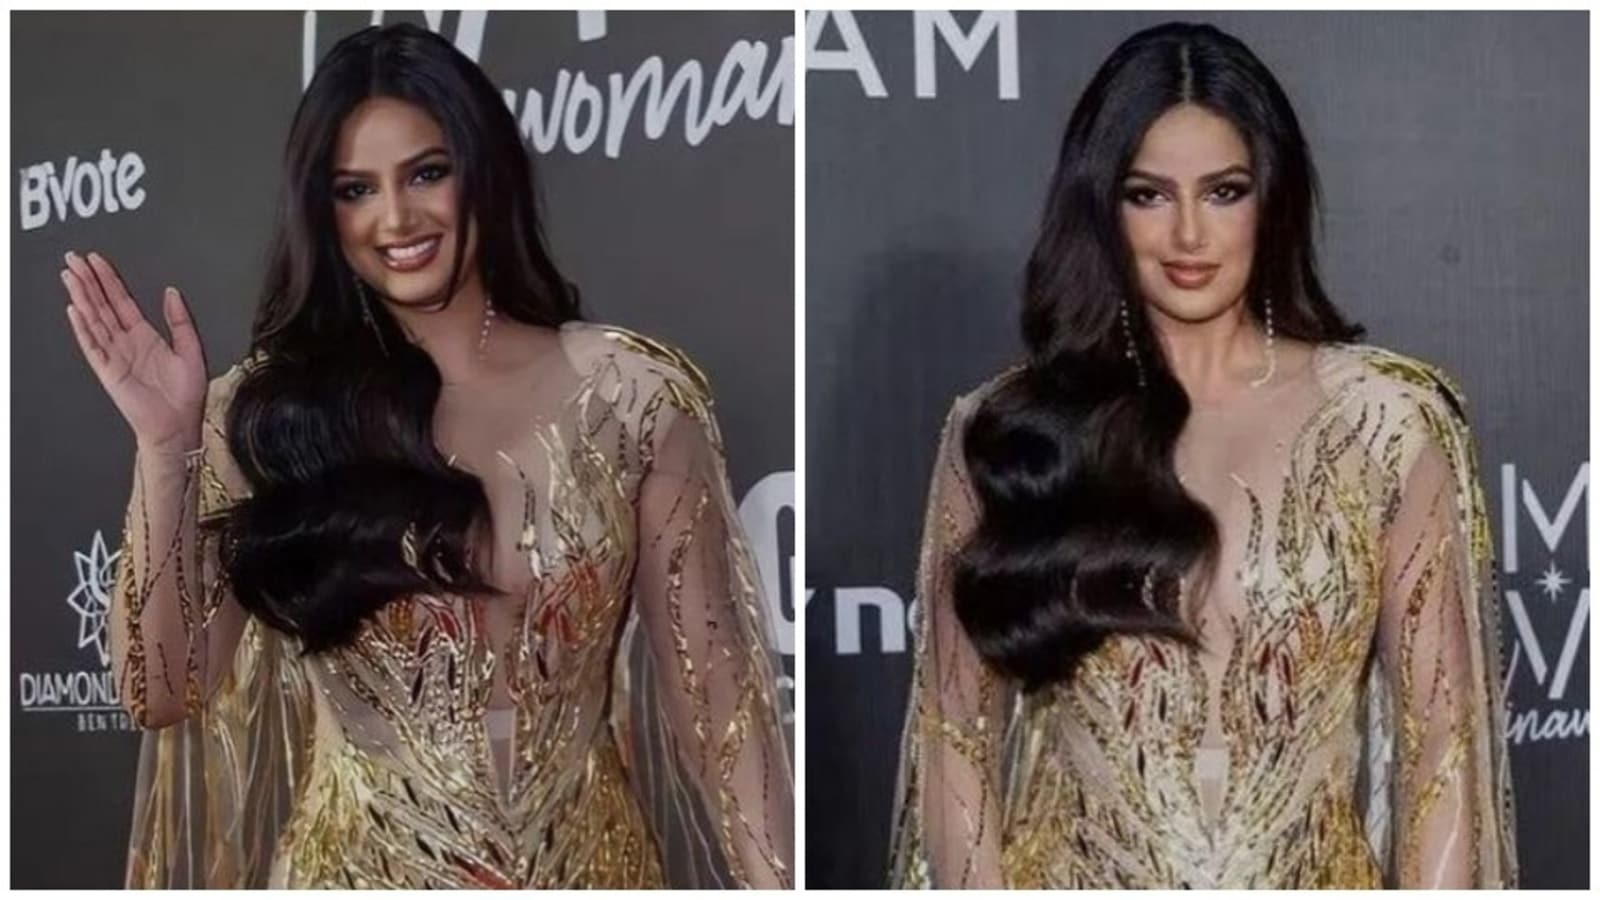 Harnaaz Sandhu is a vision in nude sequin gown for Miss Universe Vietnam red carpet, sends love and respect to Vietnam